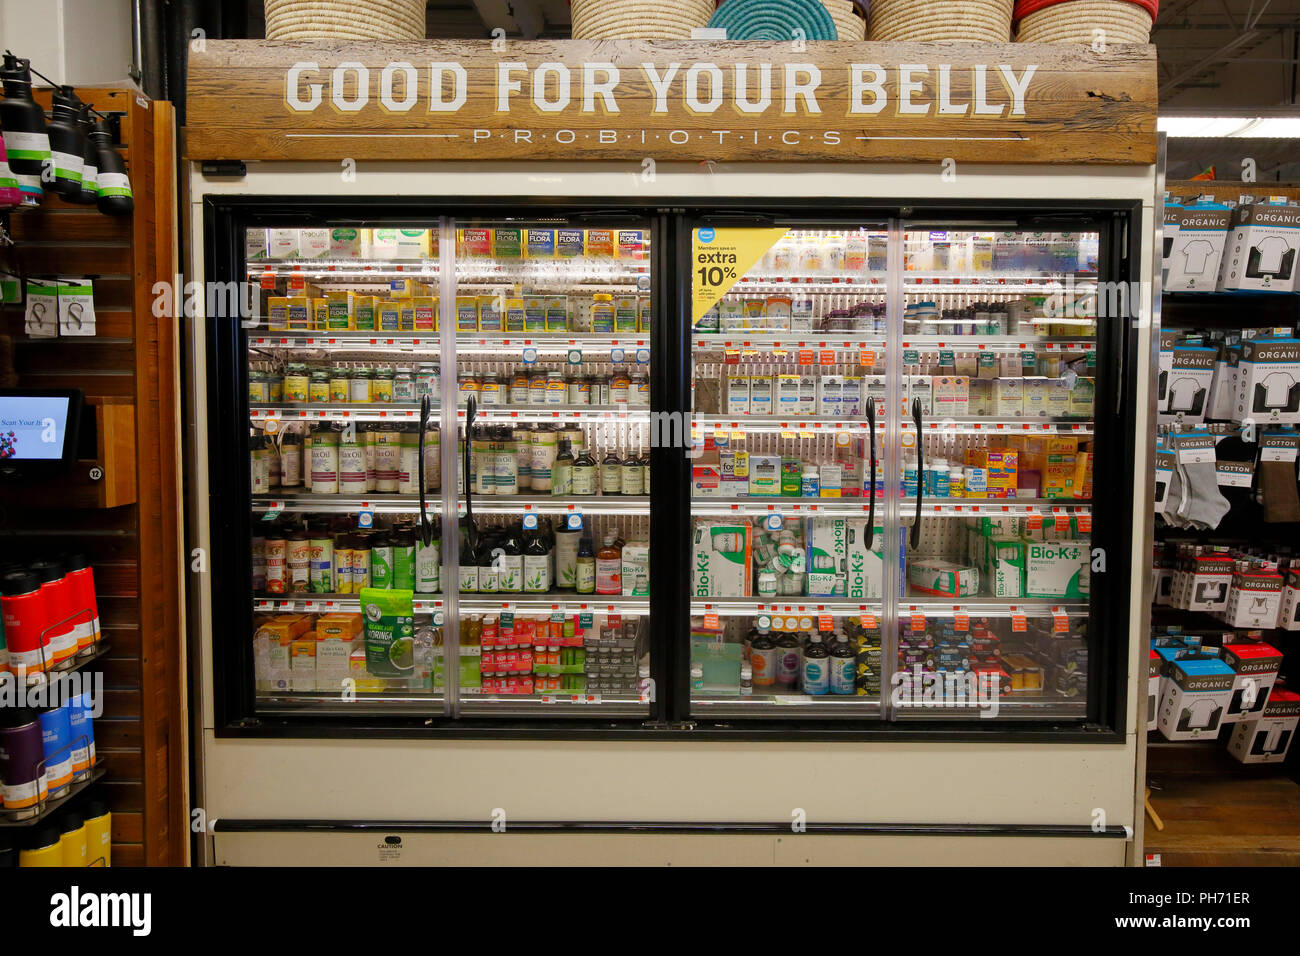 A refrigerator full of probiotics and superfoods at a Whole Foods Market Stock Photo